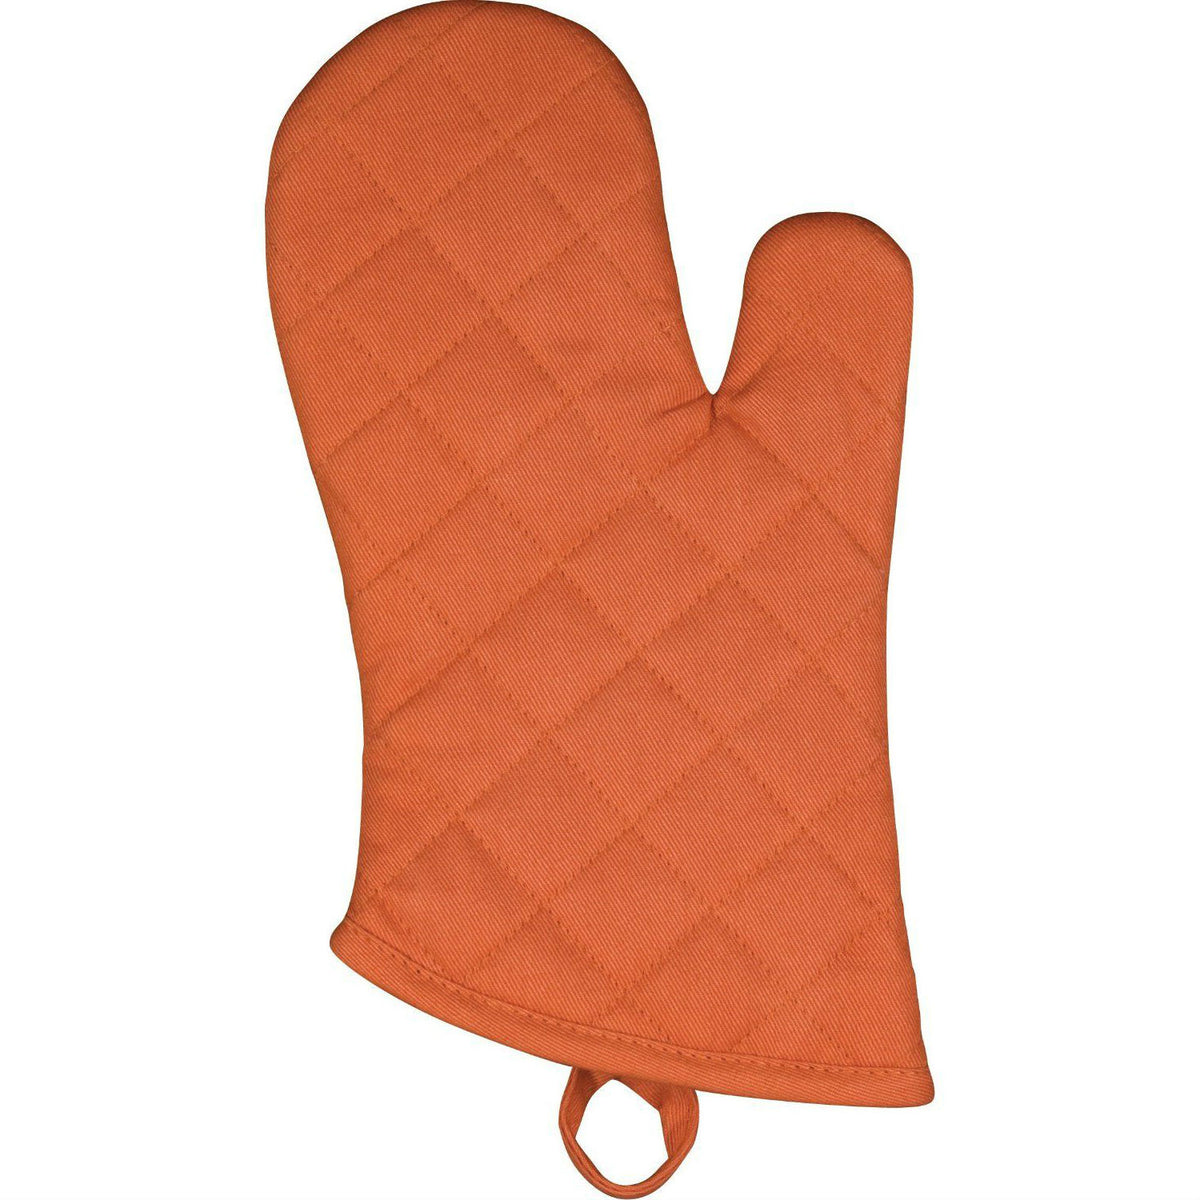 buy oven mitts & kitchen textiles at cheap rate in bulk. wholesale & retail kitchen goods & supplies store.